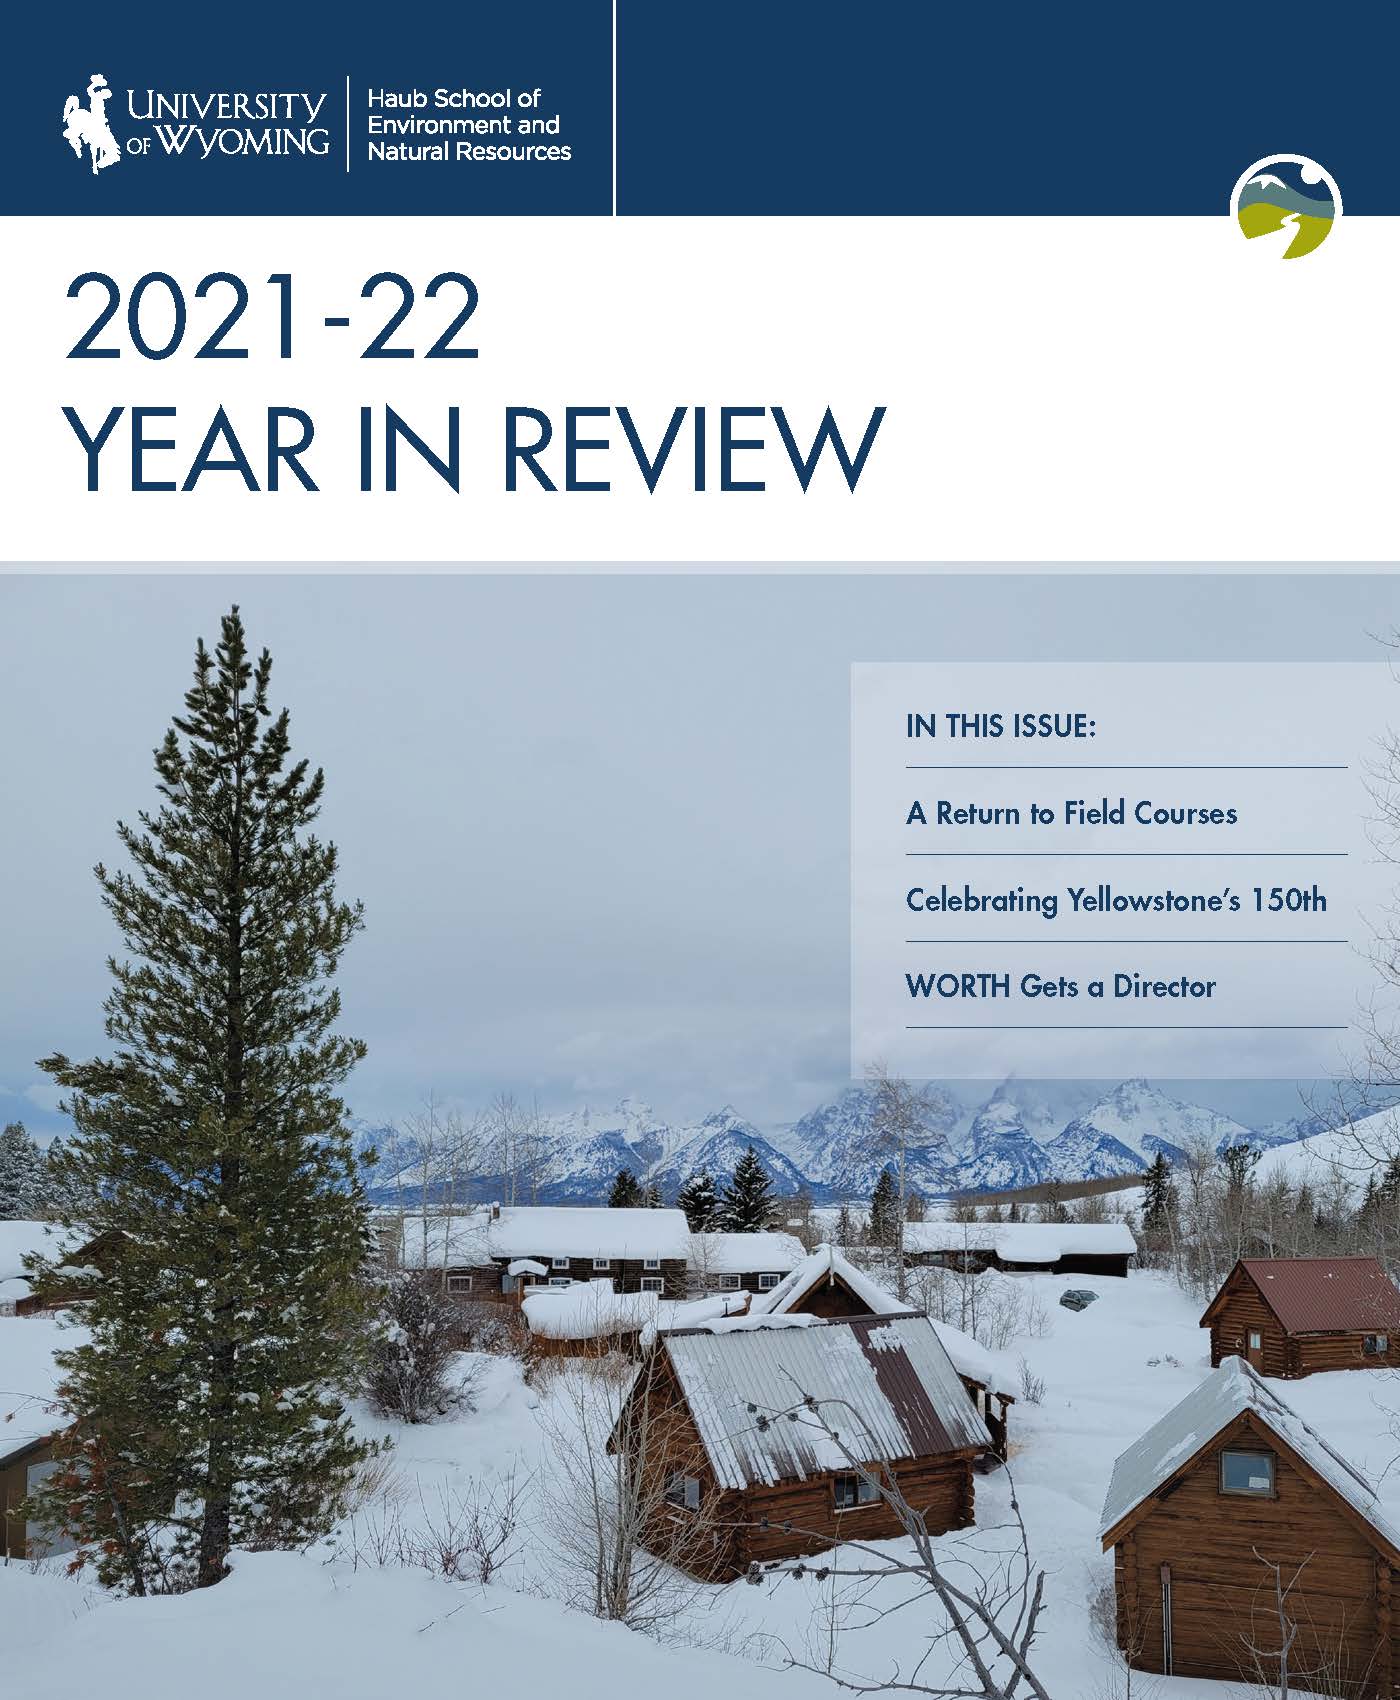 Cover of Haub School Year in Review with a snowy landscape